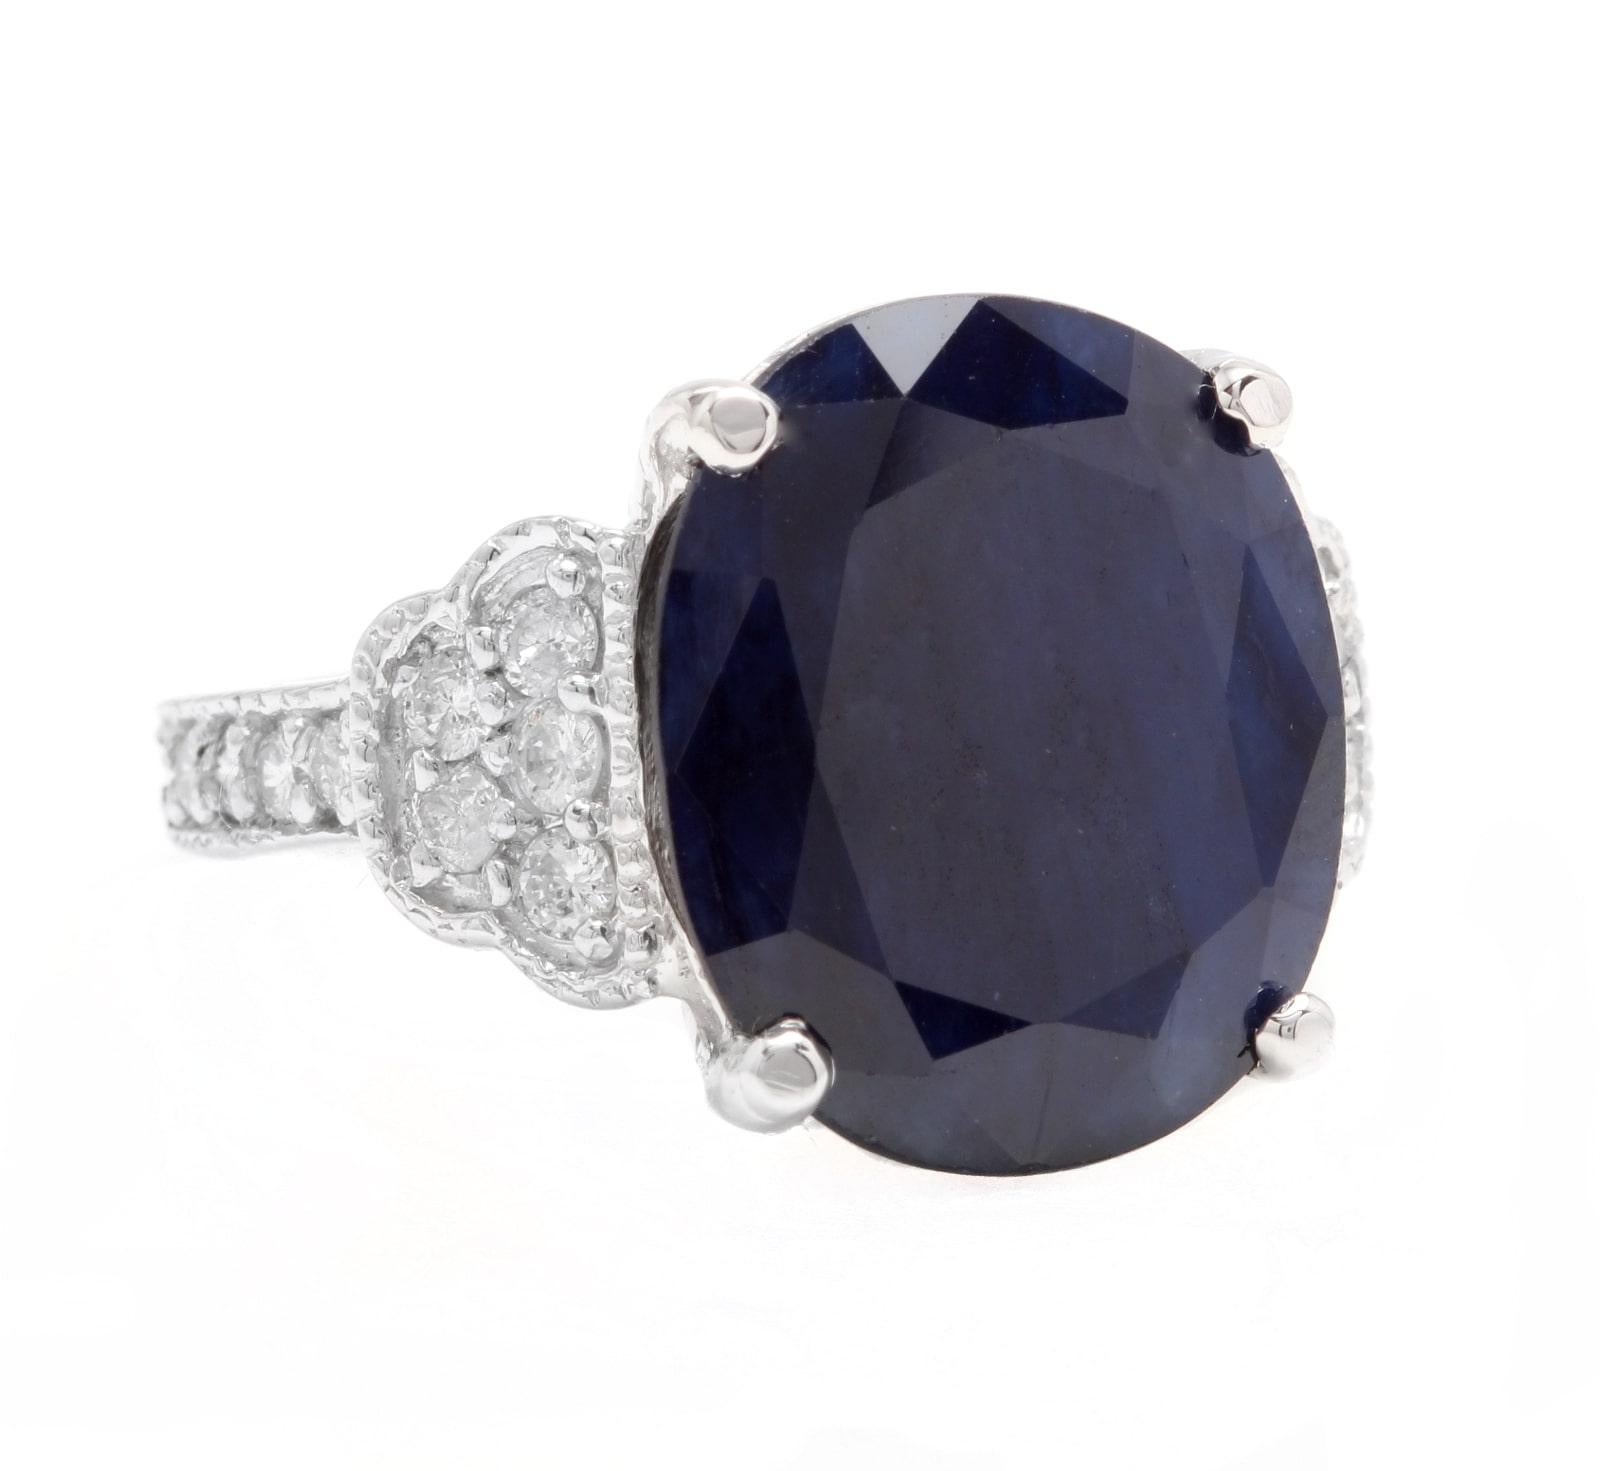 14.60 Carats Exquisite Natural Blue Sapphire and Diamond 14K Solid White Gold Ring

Total Blue Sapphire Weight is: Approx. 14.00 Carats

Sapphire Measures: Approx. 15.80 x 13.90mm

Natural Round Diamonds Weight: Approx. 0.60 Carats (color G-H /